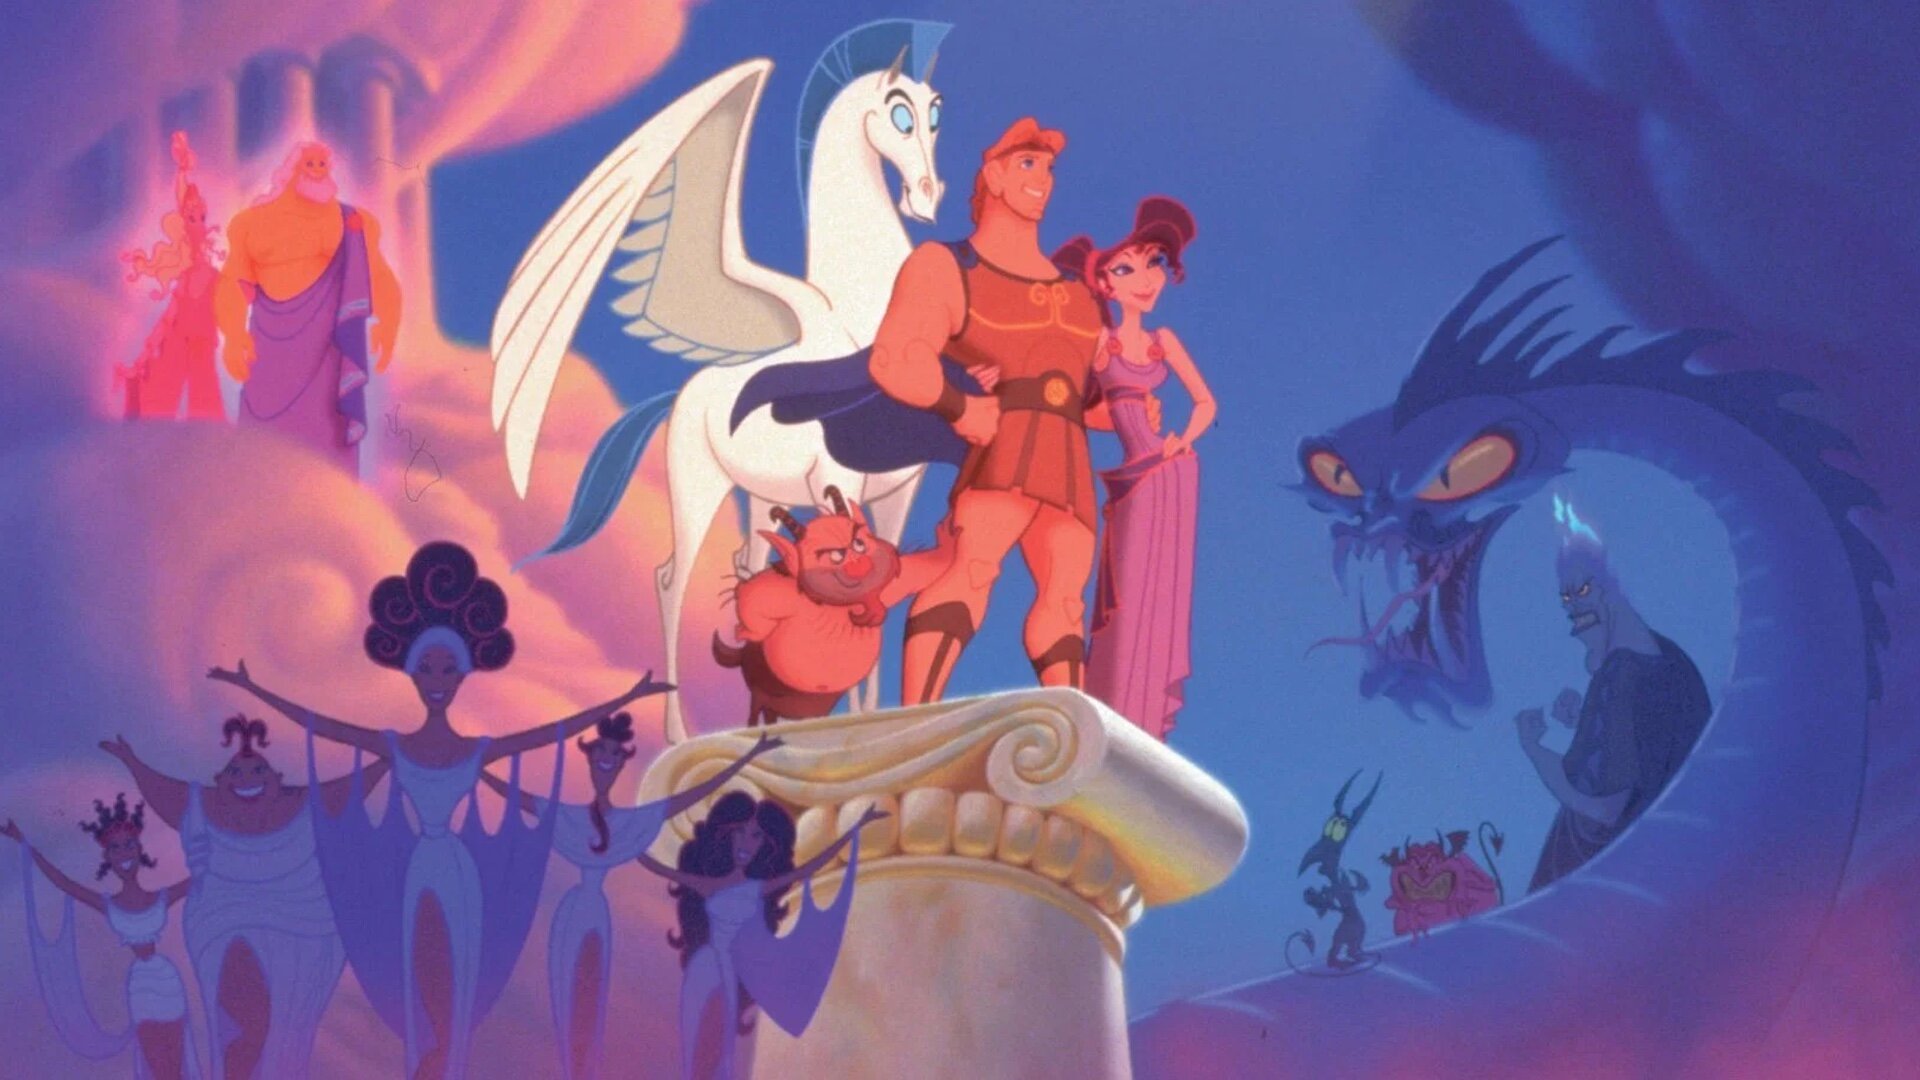 ‘Shang-Chi’ Writer Dave Callaham to Pen Script for Disney’s Live-Action ‘Hercules’; Russo Brothers to Produce